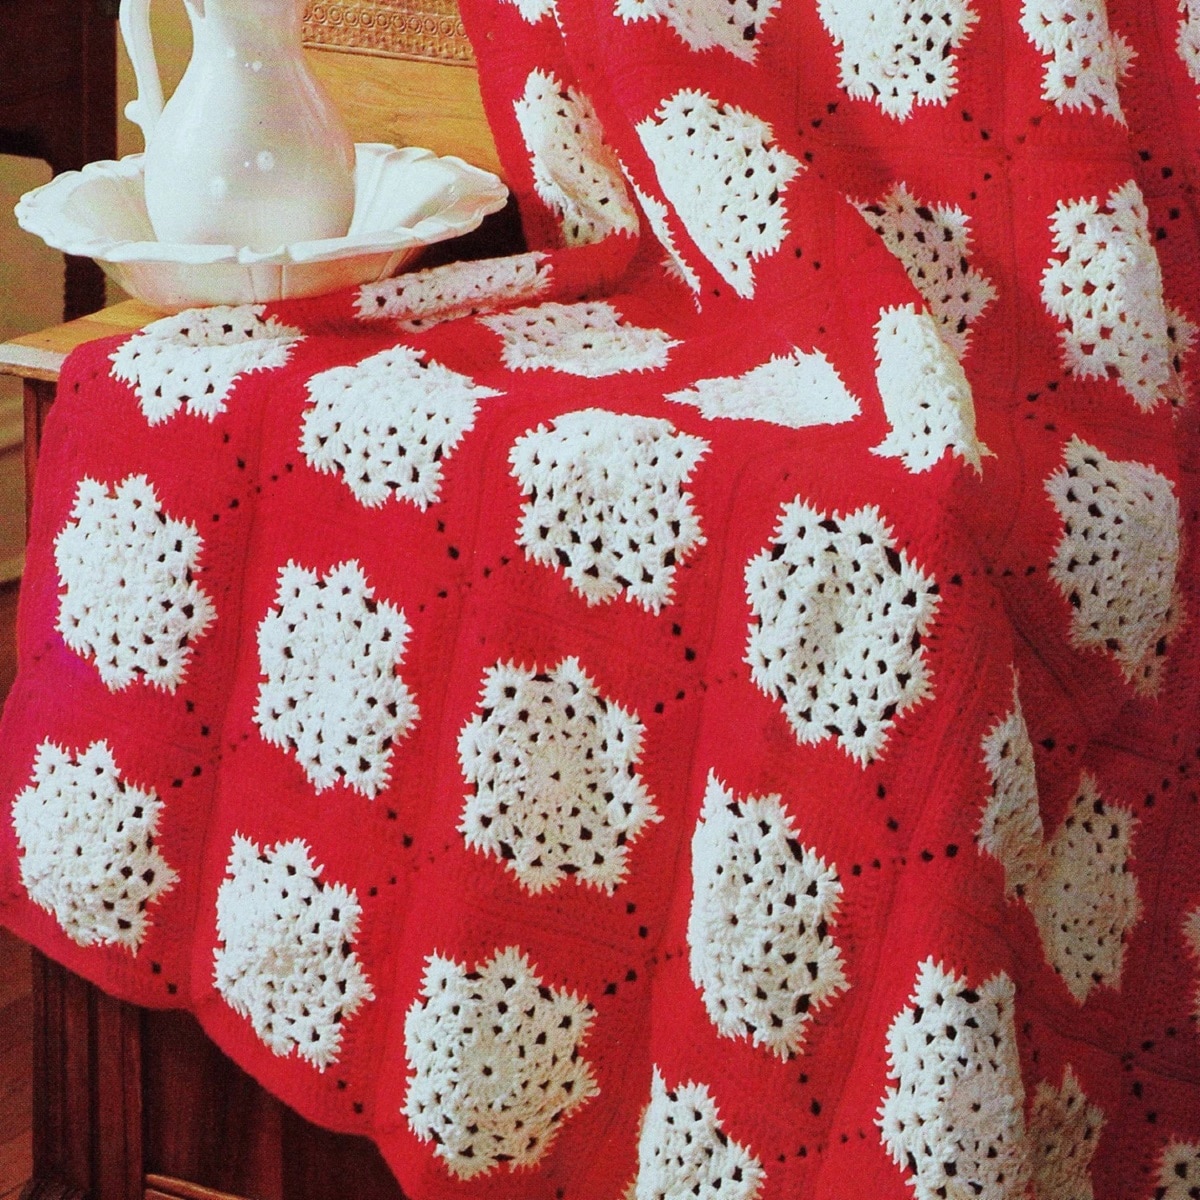 A red crochet blanket with white snowflakes in horizontal lines across the entire blanket draped over a chair.